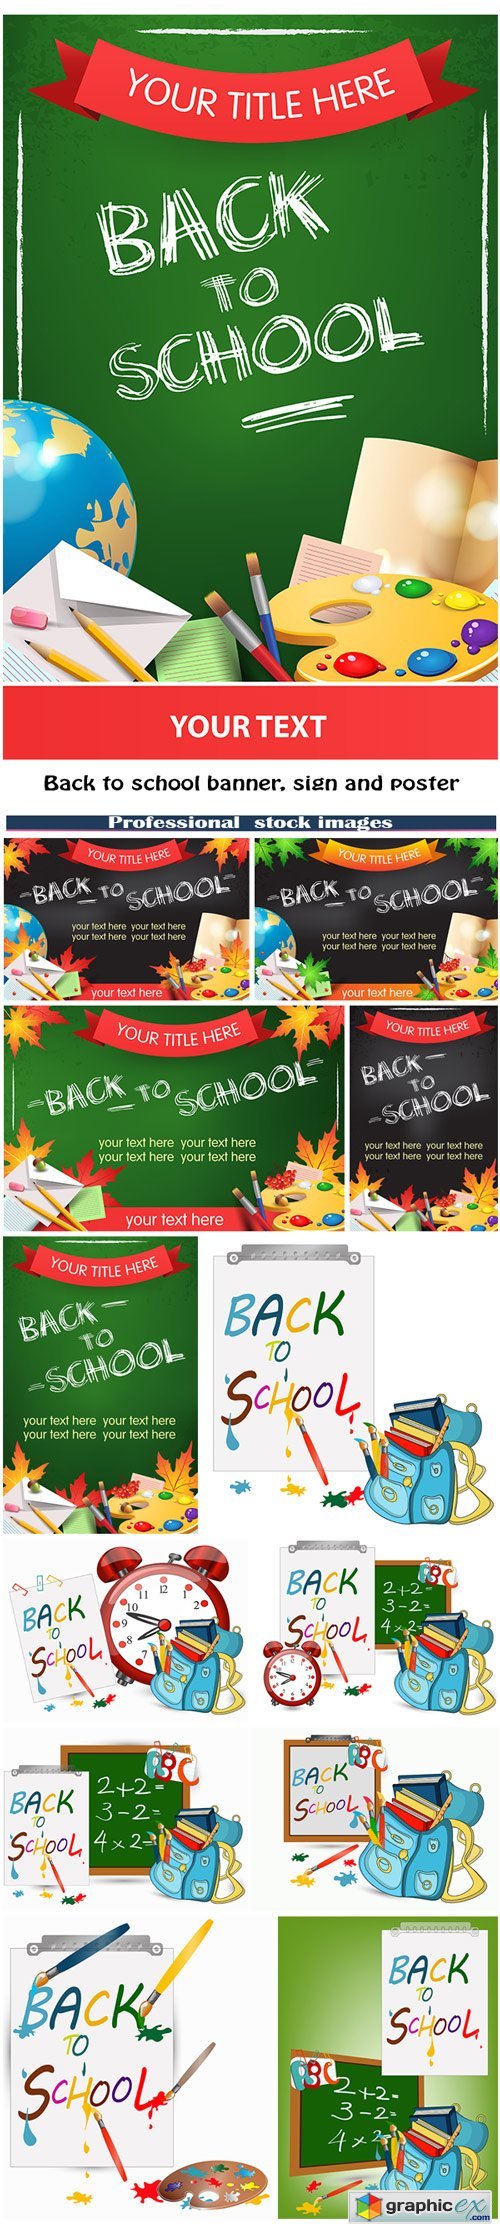 Back to school banner, sign and poster